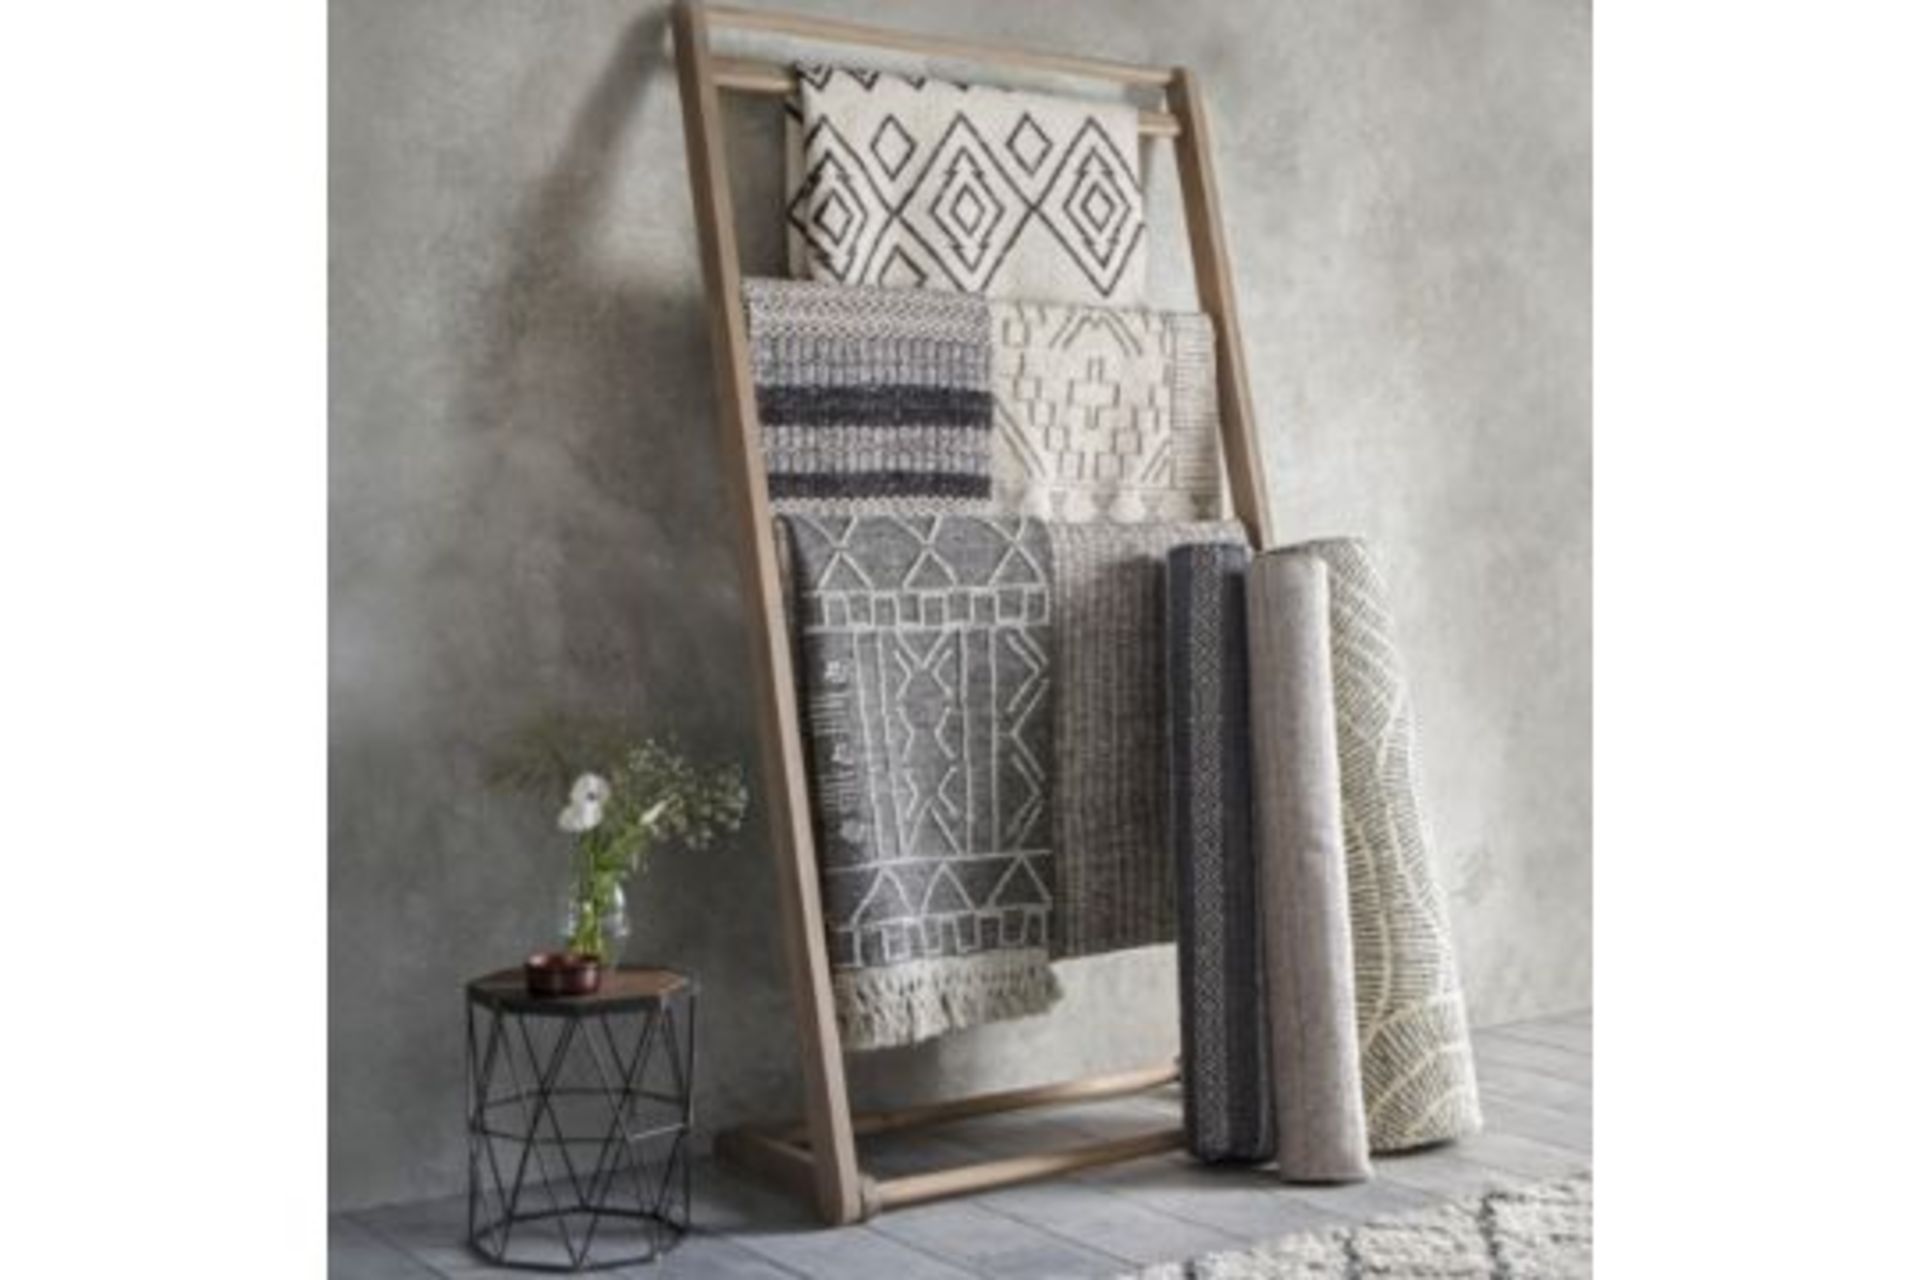 Rug Display Unit A Practical Solution For Displaying Multiple Rugs In Store, Especially Where